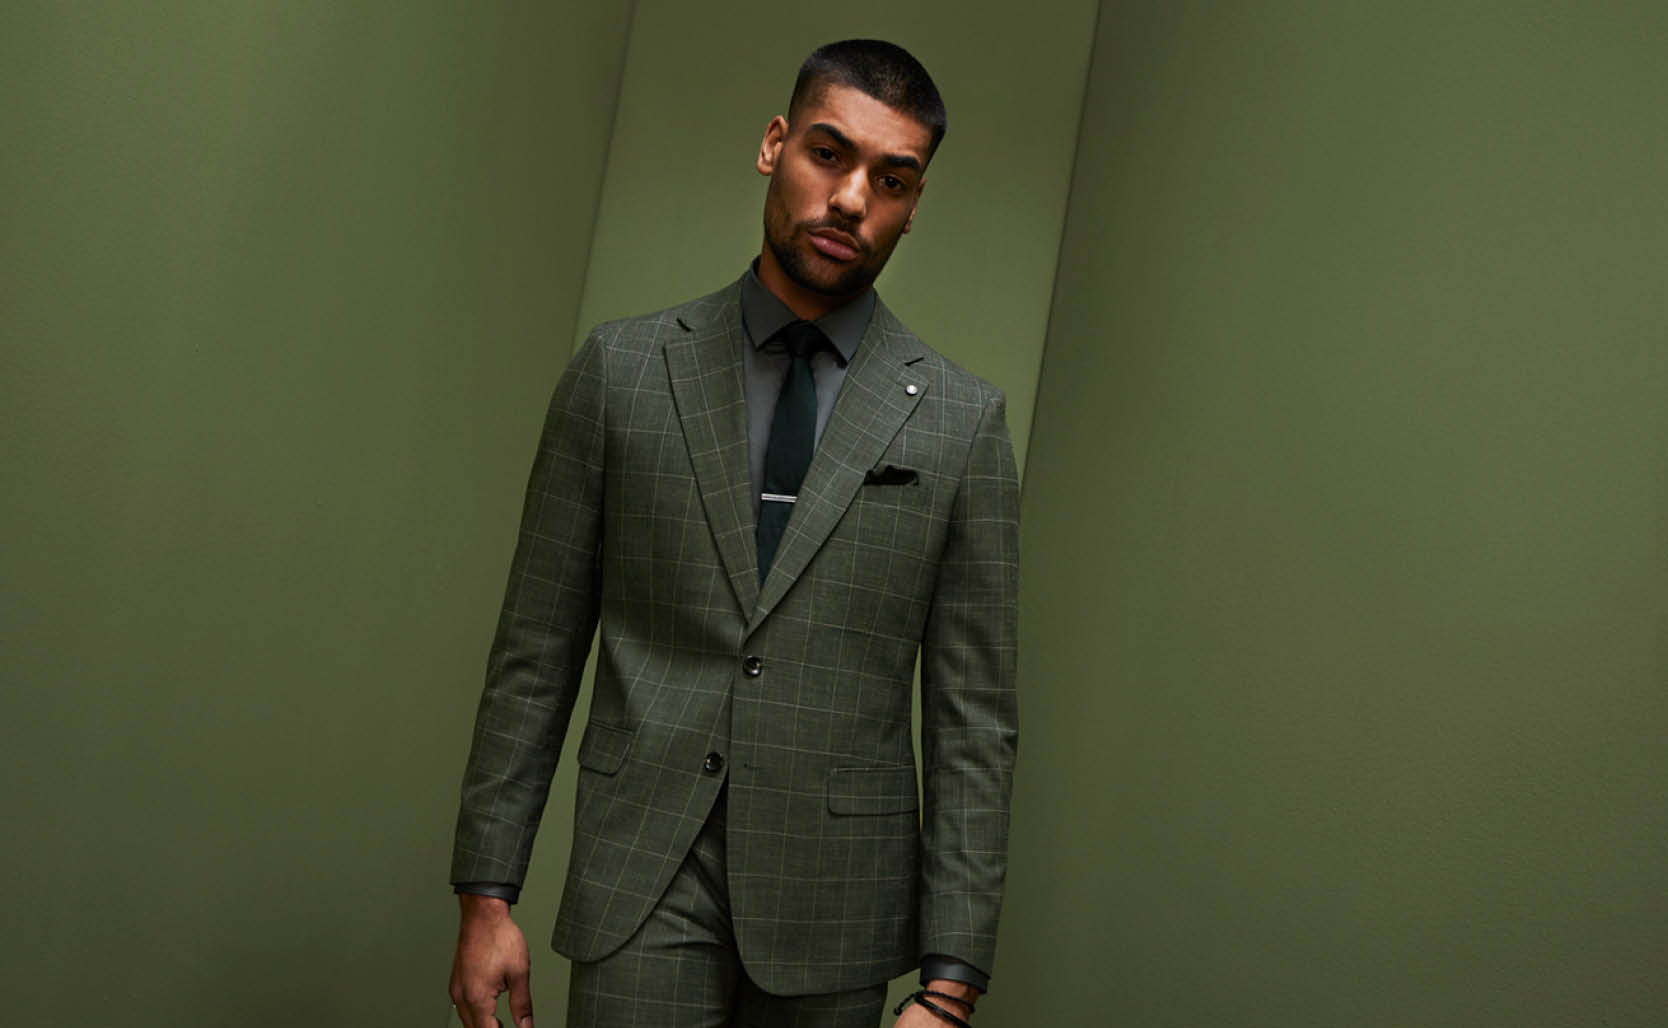 Male model in POLITIX dark green windowpane suit with green tie and shirt standing in front of green wall